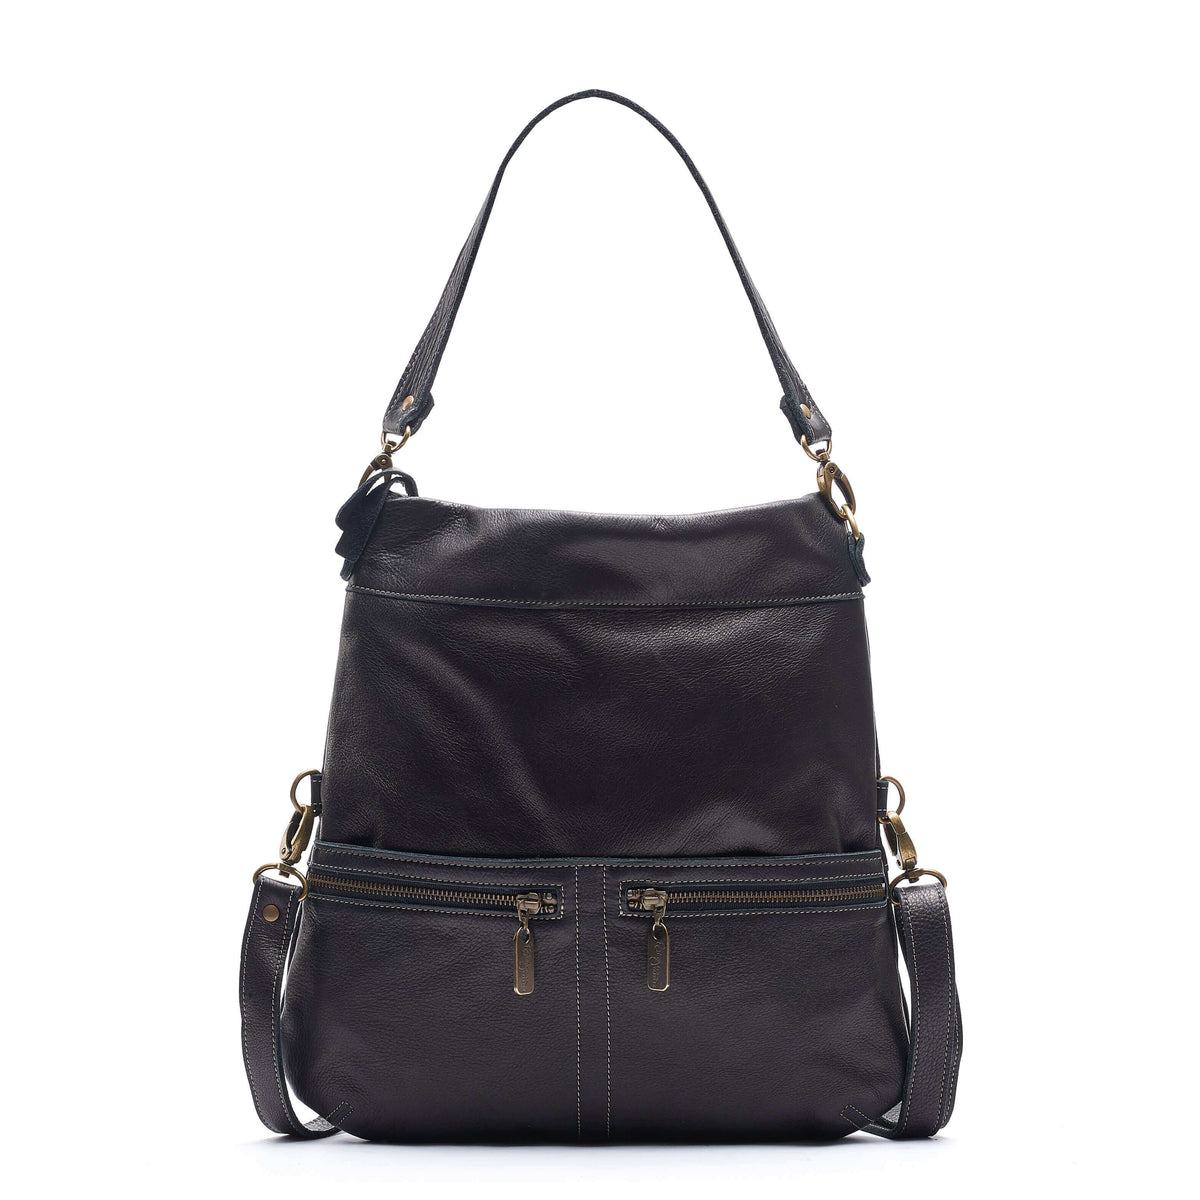 Black Leather Convertible Crossbody - made in USA, Brynn Capella $428 best sellers, Black, Pull-up leather